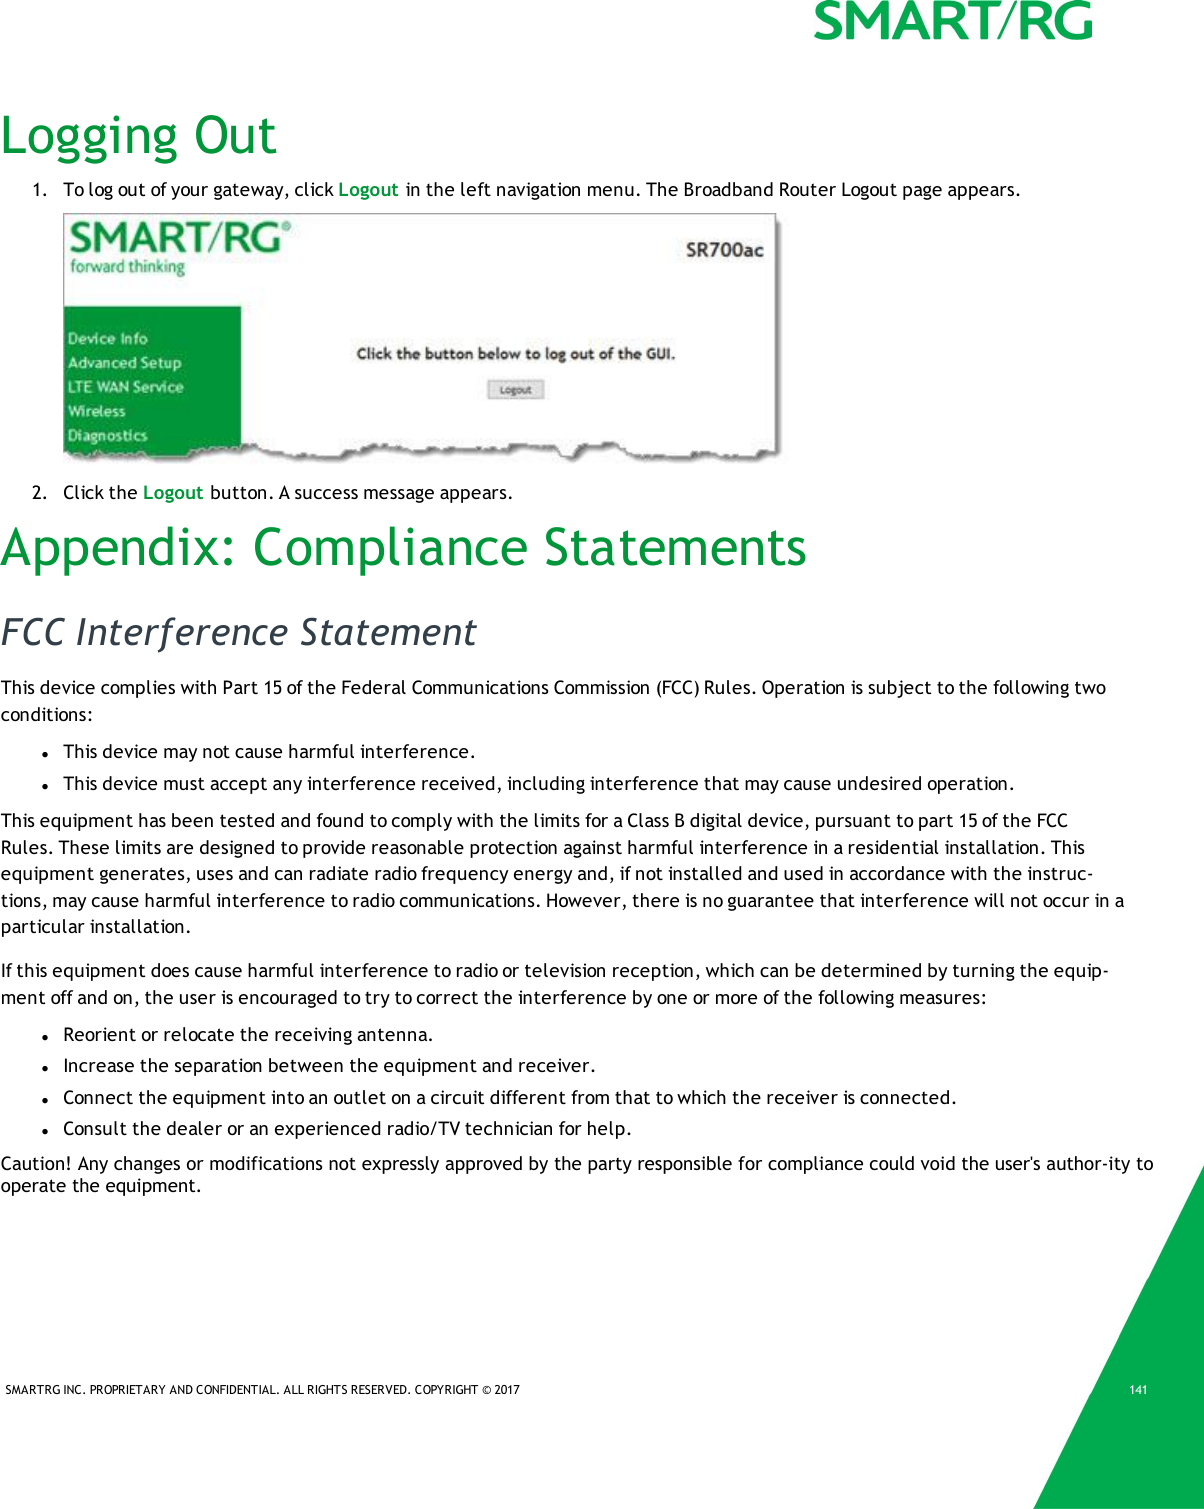 SMARTRG INC. PROPRIETARY AND CONFIDENTIAL. ALL RIGHTS RESERVED. COPYRIGHT © 2017 141Logging Out1. To log out of your gateway, click Logout in the left navigation menu. The Broadband Router Logout page appears.2. Click the Logout button. A success message appears.Appendix: Compliance StatementsFCC Interference StatementThis device complies with Part 15 of the Federal Communications Commission (FCC) Rules. Operation is subject to the following twoconditions:lThis device may not cause harmful interference.lThis device must accept any interference received, including interference that may cause undesired operation.This equipment has been tested and found to comply with the limits for a Class B digital device, pursuant to part 15 of the FCCRules. These limits are designed to provide reasonable protection against harmful interference in a residential installation. Thisequipment generates, uses and can radiate radio frequency energy and, if not installed and used in accordance with the instruc-tions, may cause harmful interference to radio communications. However, there is no guarantee that interference will not occur in aparticular installation.If this equipment does cause harmful interference to radio or television reception, which can be determined by turning the equip-ment off and on, the user is encouraged to try to correct the interference by one or more of the following measures:lReorient or relocate the receiving antenna.lIncrease the separation between the equipment and receiver.lConnect the equipment into an outlet on a circuit different from that to which the receiver is connected.lConsult the dealer or an experienced radio/TV technician for help.Caution! Any changes or modifications not expressly approved by the party responsible for compliance could void the user&apos;s author-ity to operate the equipment.